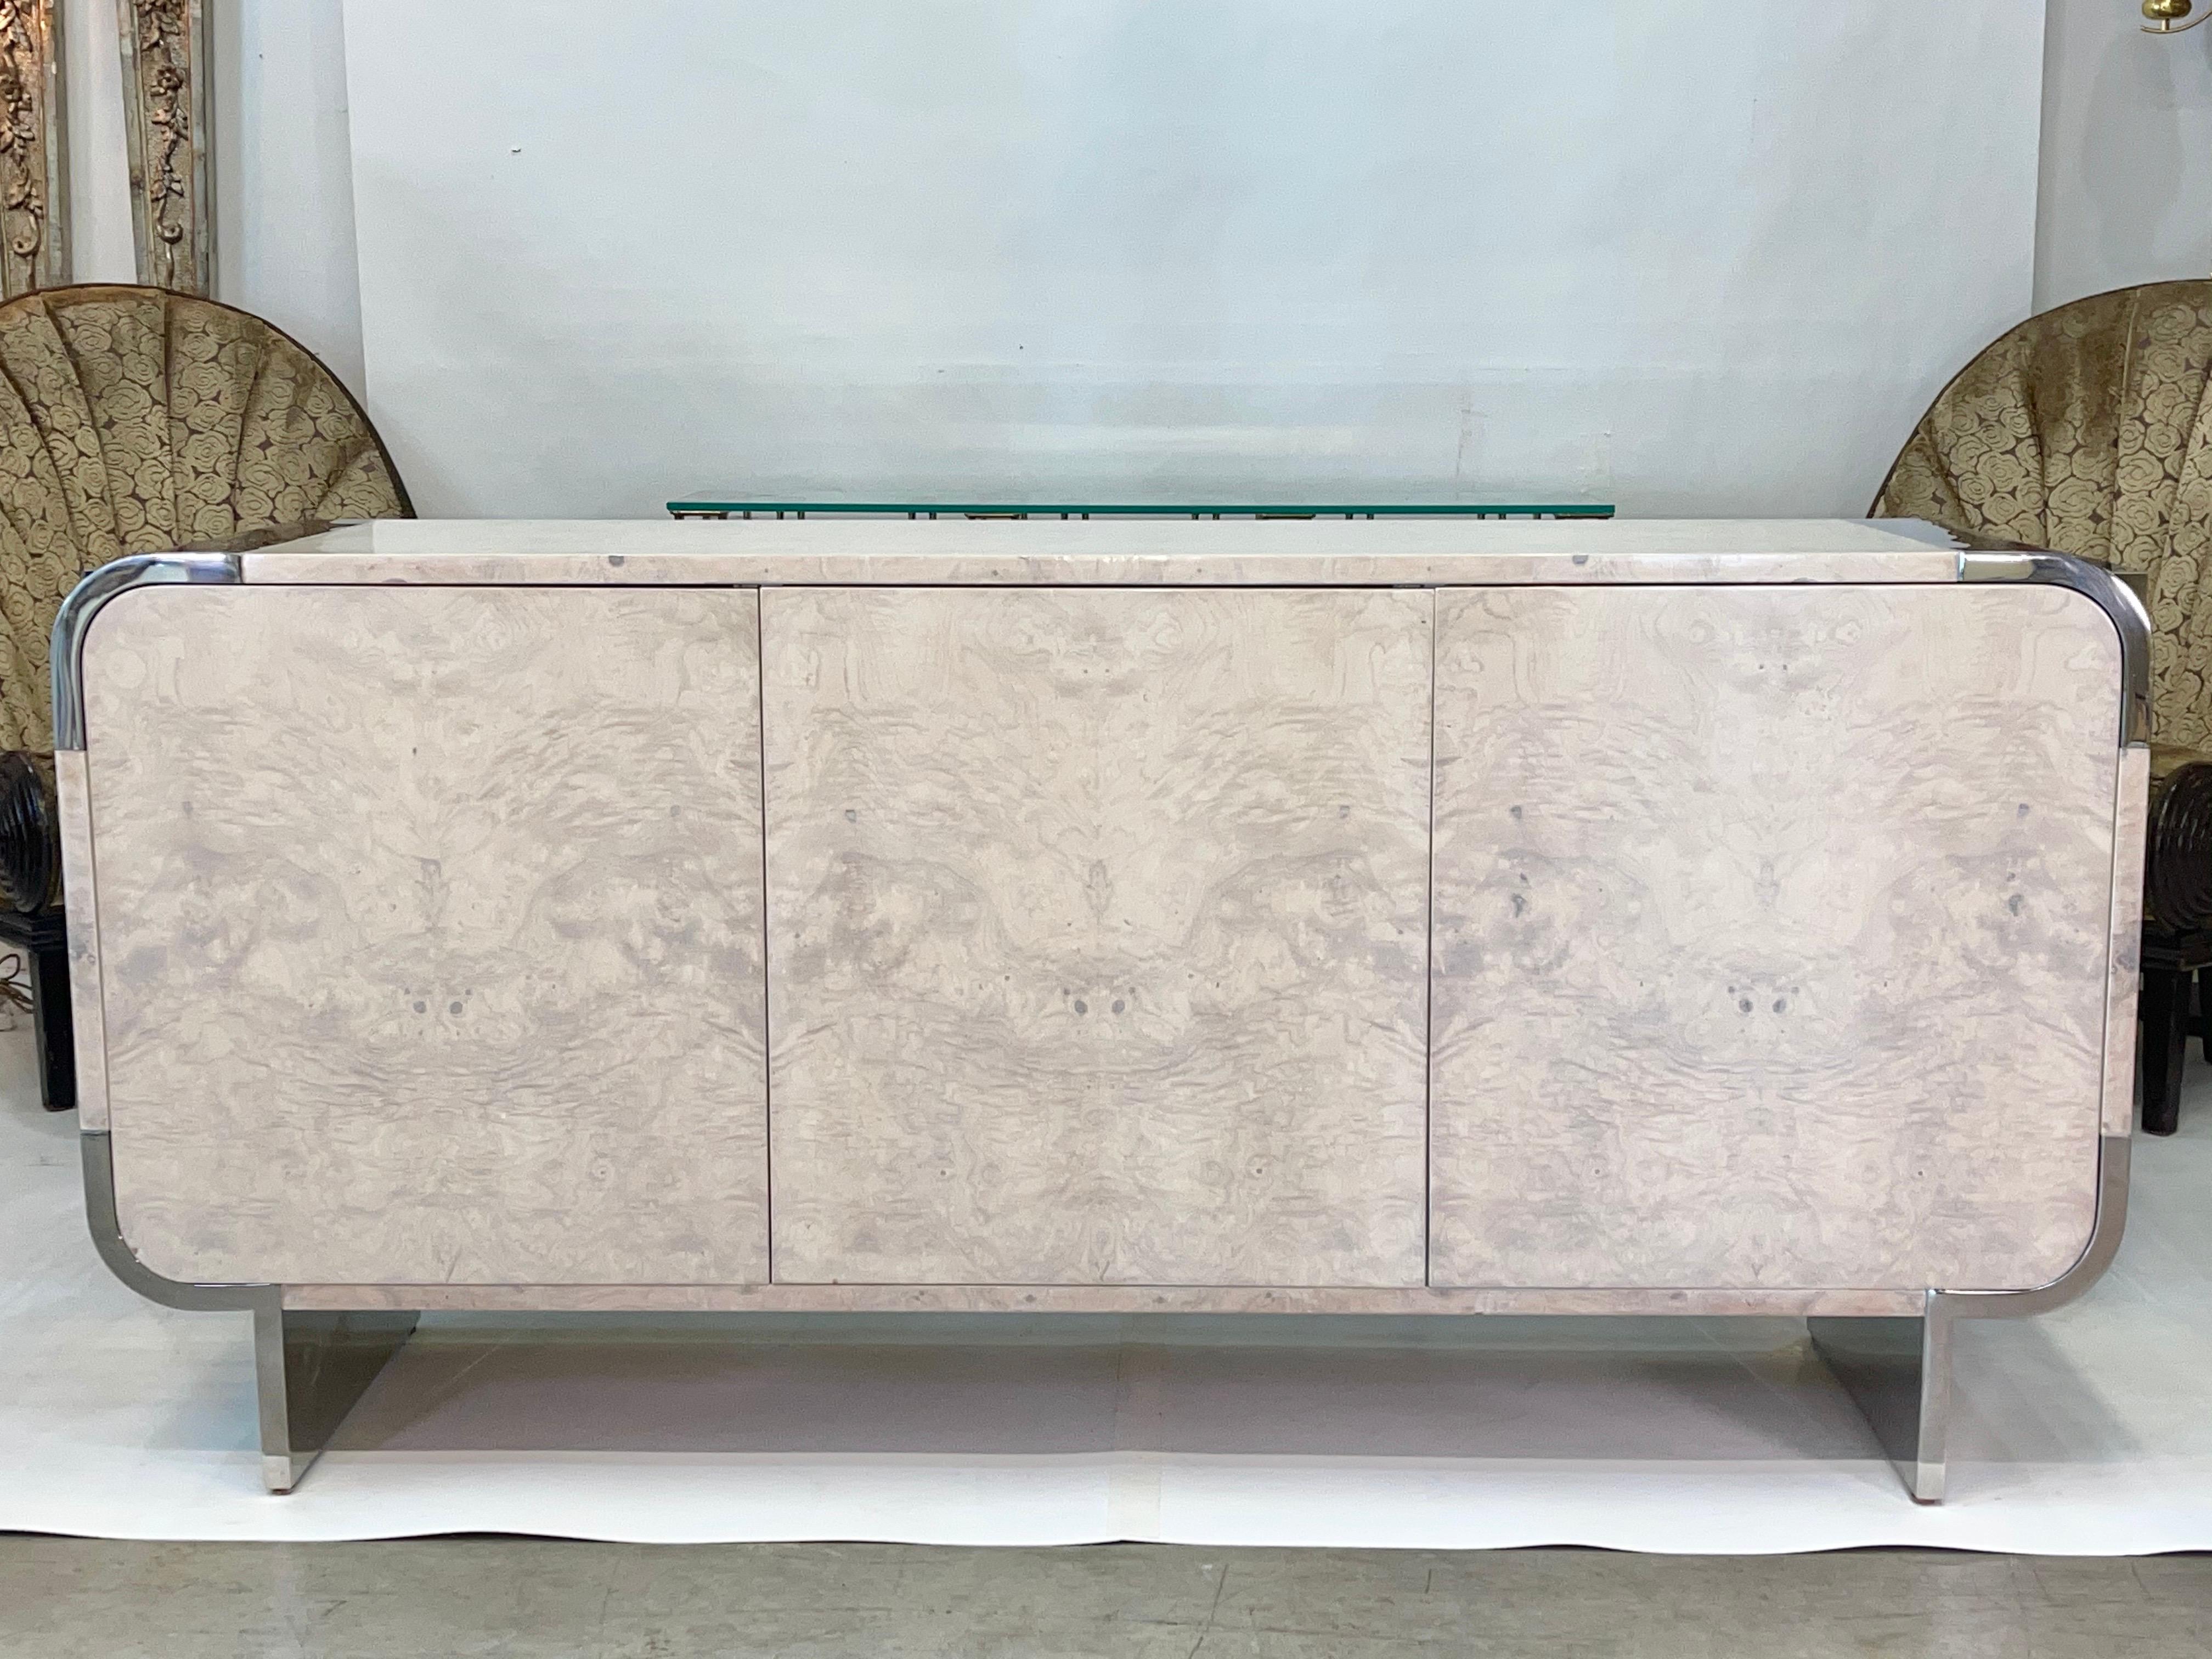 Impressive custom finish bleached burl credenza by Irving M. Rosen for the Pace Collection, 1974, with mirror polished steel radial corners and legs (7